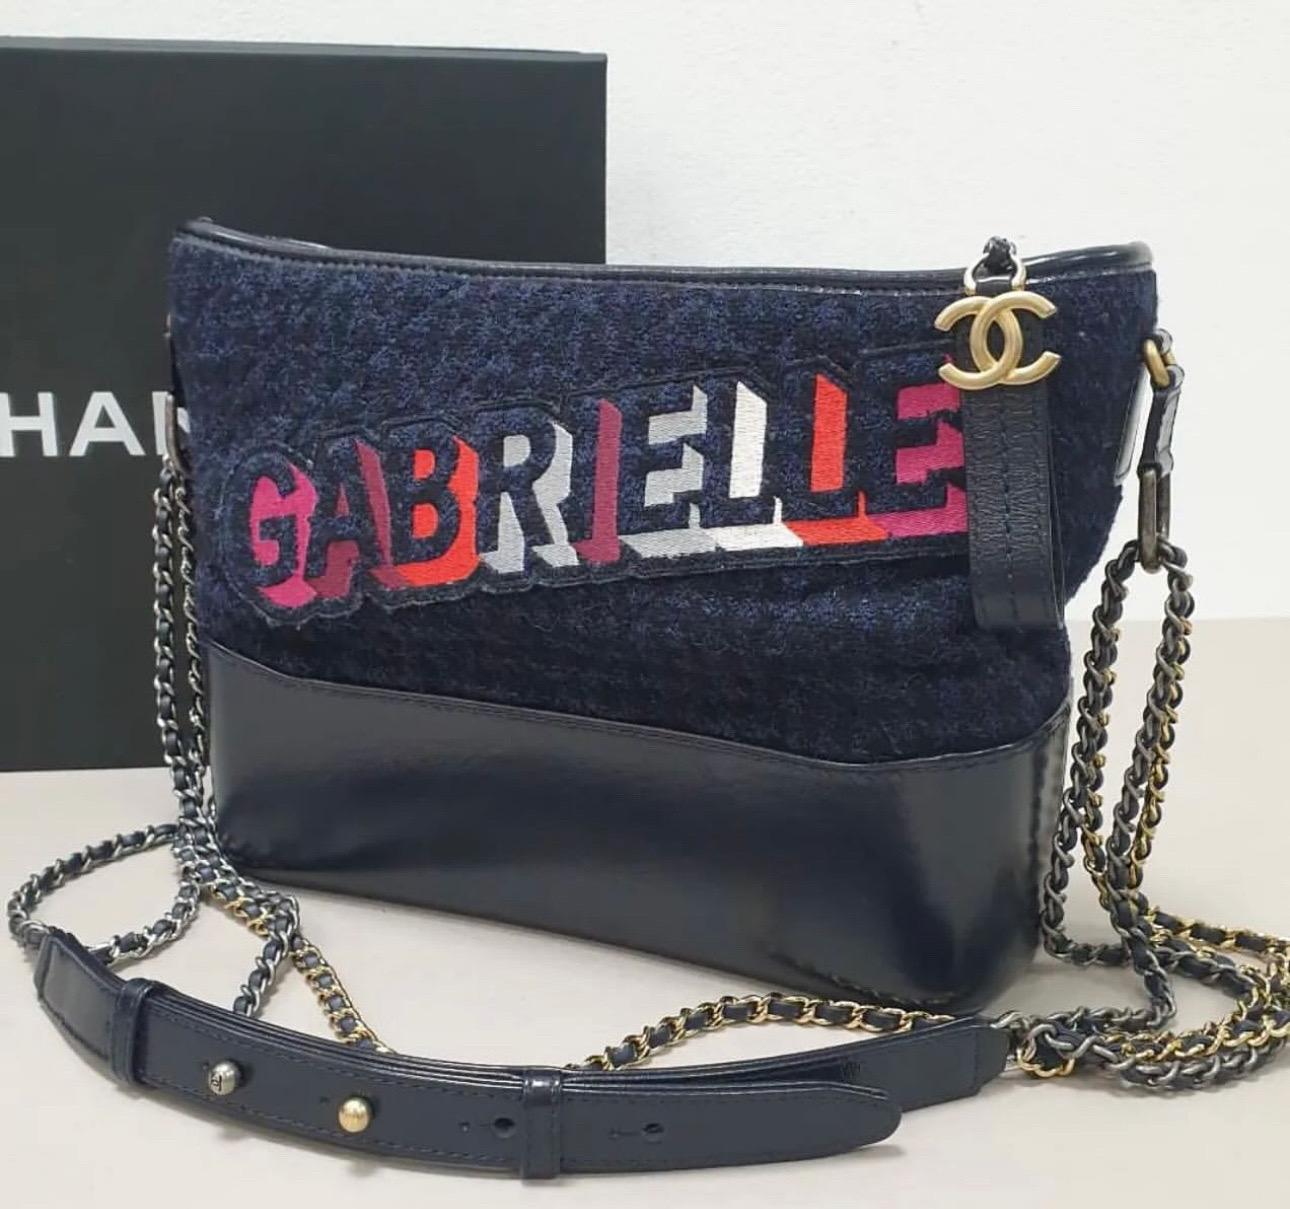 Chanel navy leather and tweed Gabrielle bag. Can be worn shoulder or double body strap


This Gabrielle bag from the House of Chanel exudes the right amount of class and style. Crafted from black blue tweed and leather this bag is adorned with a